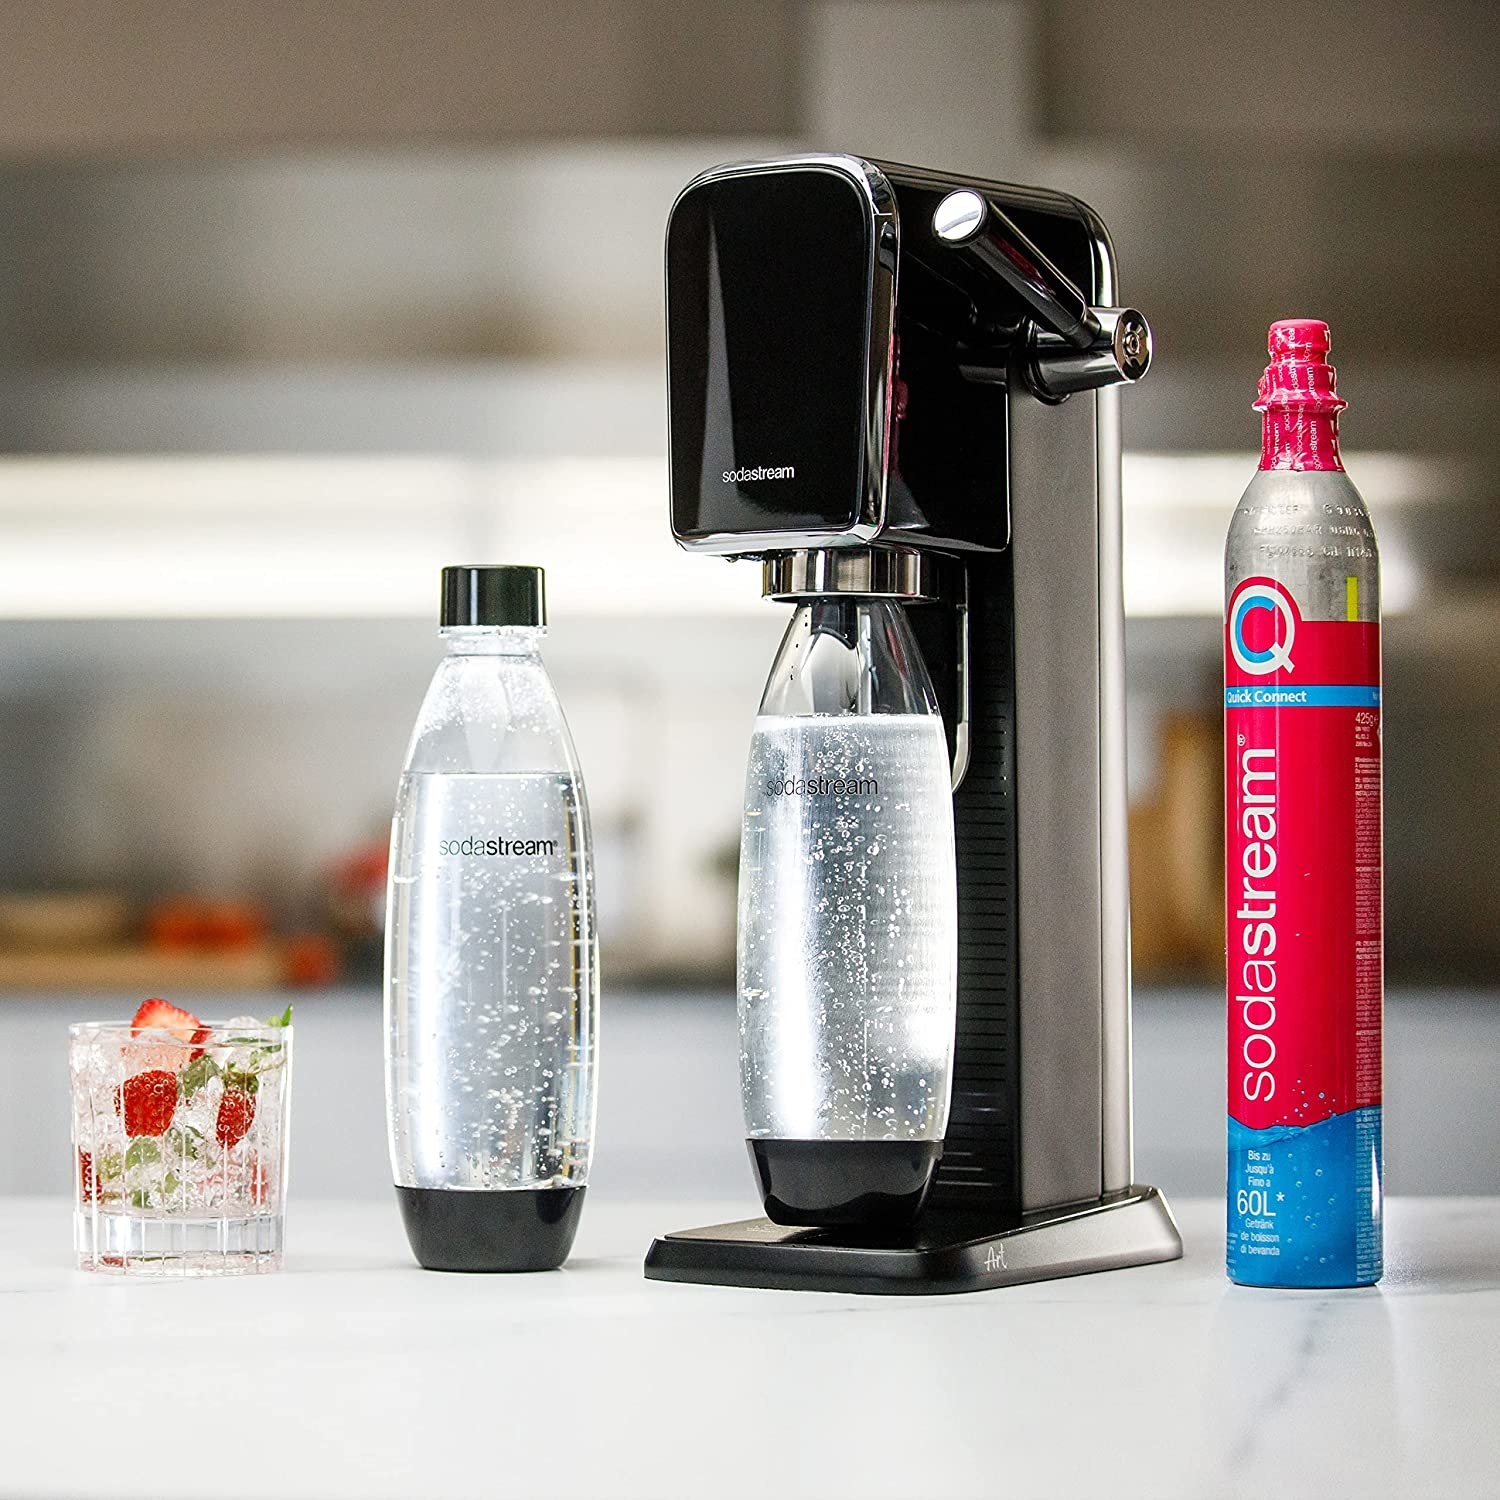 a soda stream next to two bottles, a glass, and a co2 canister